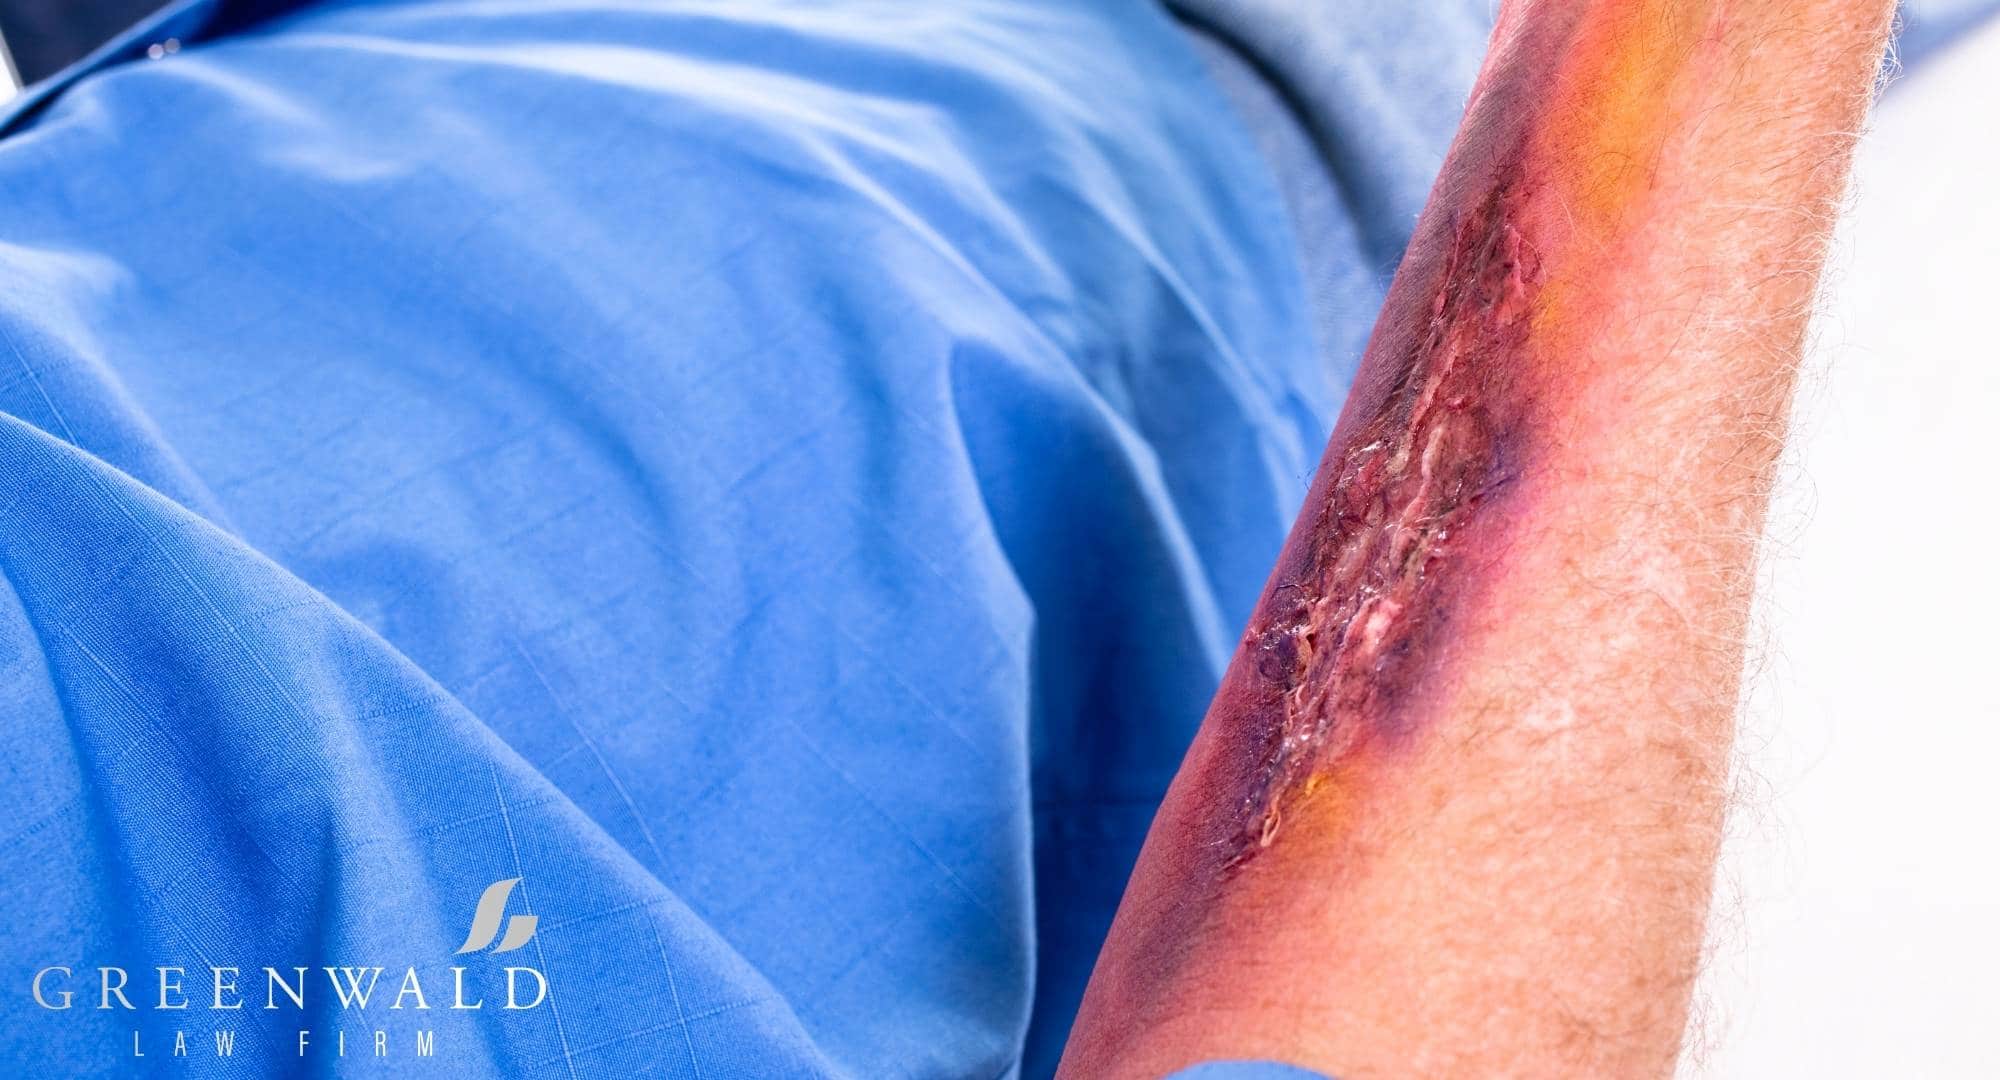 shreveport personal injury lawyer for burn injuries